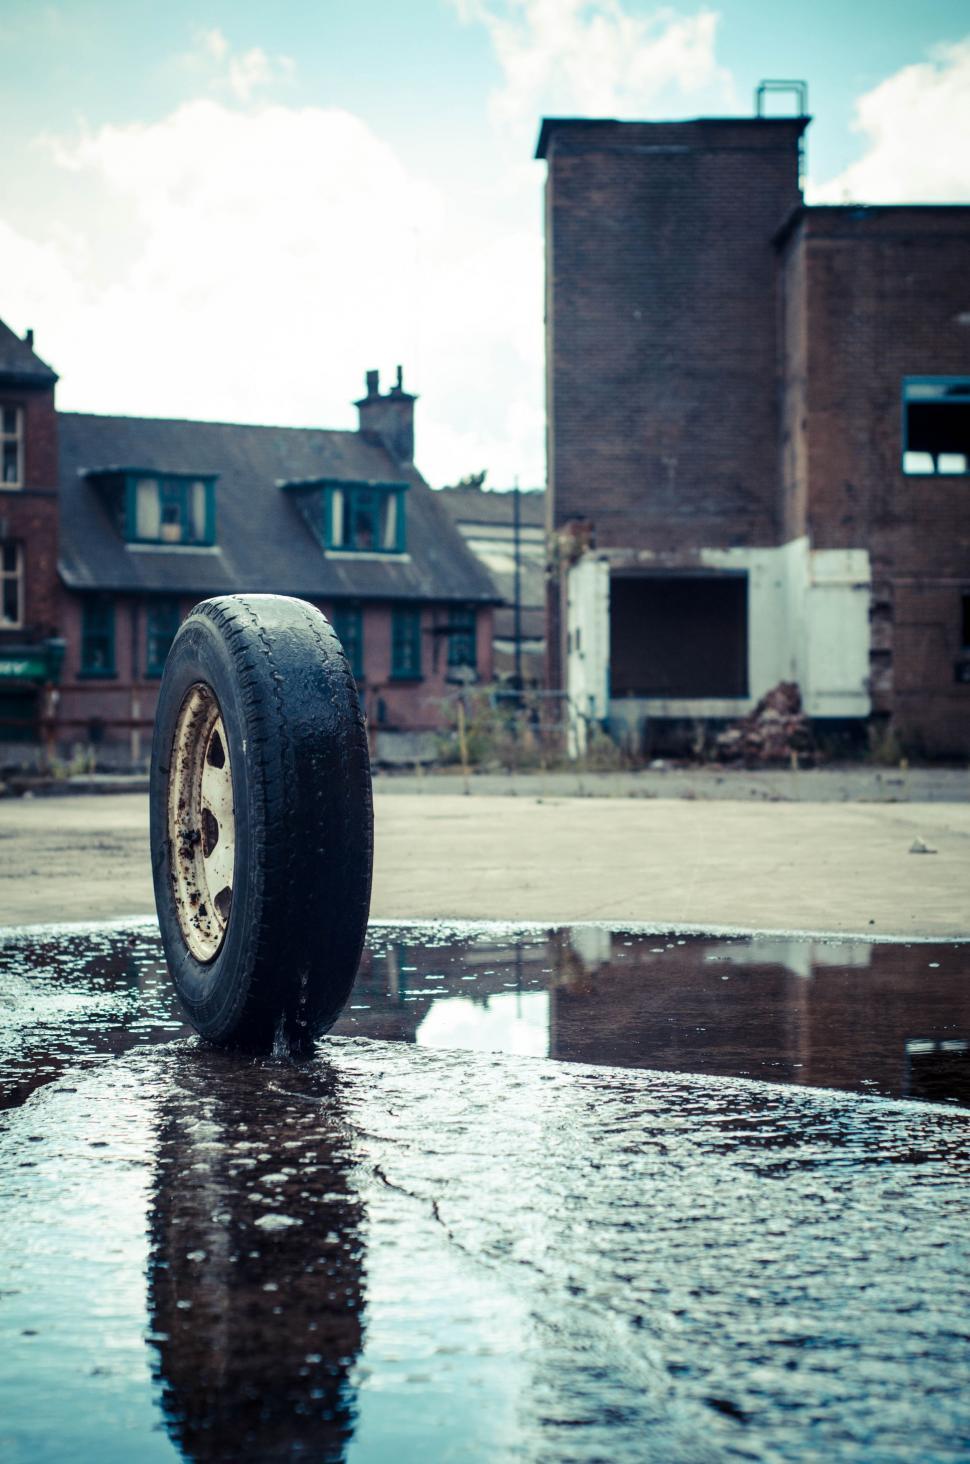 Free Image of Tire on Puddle of Water 